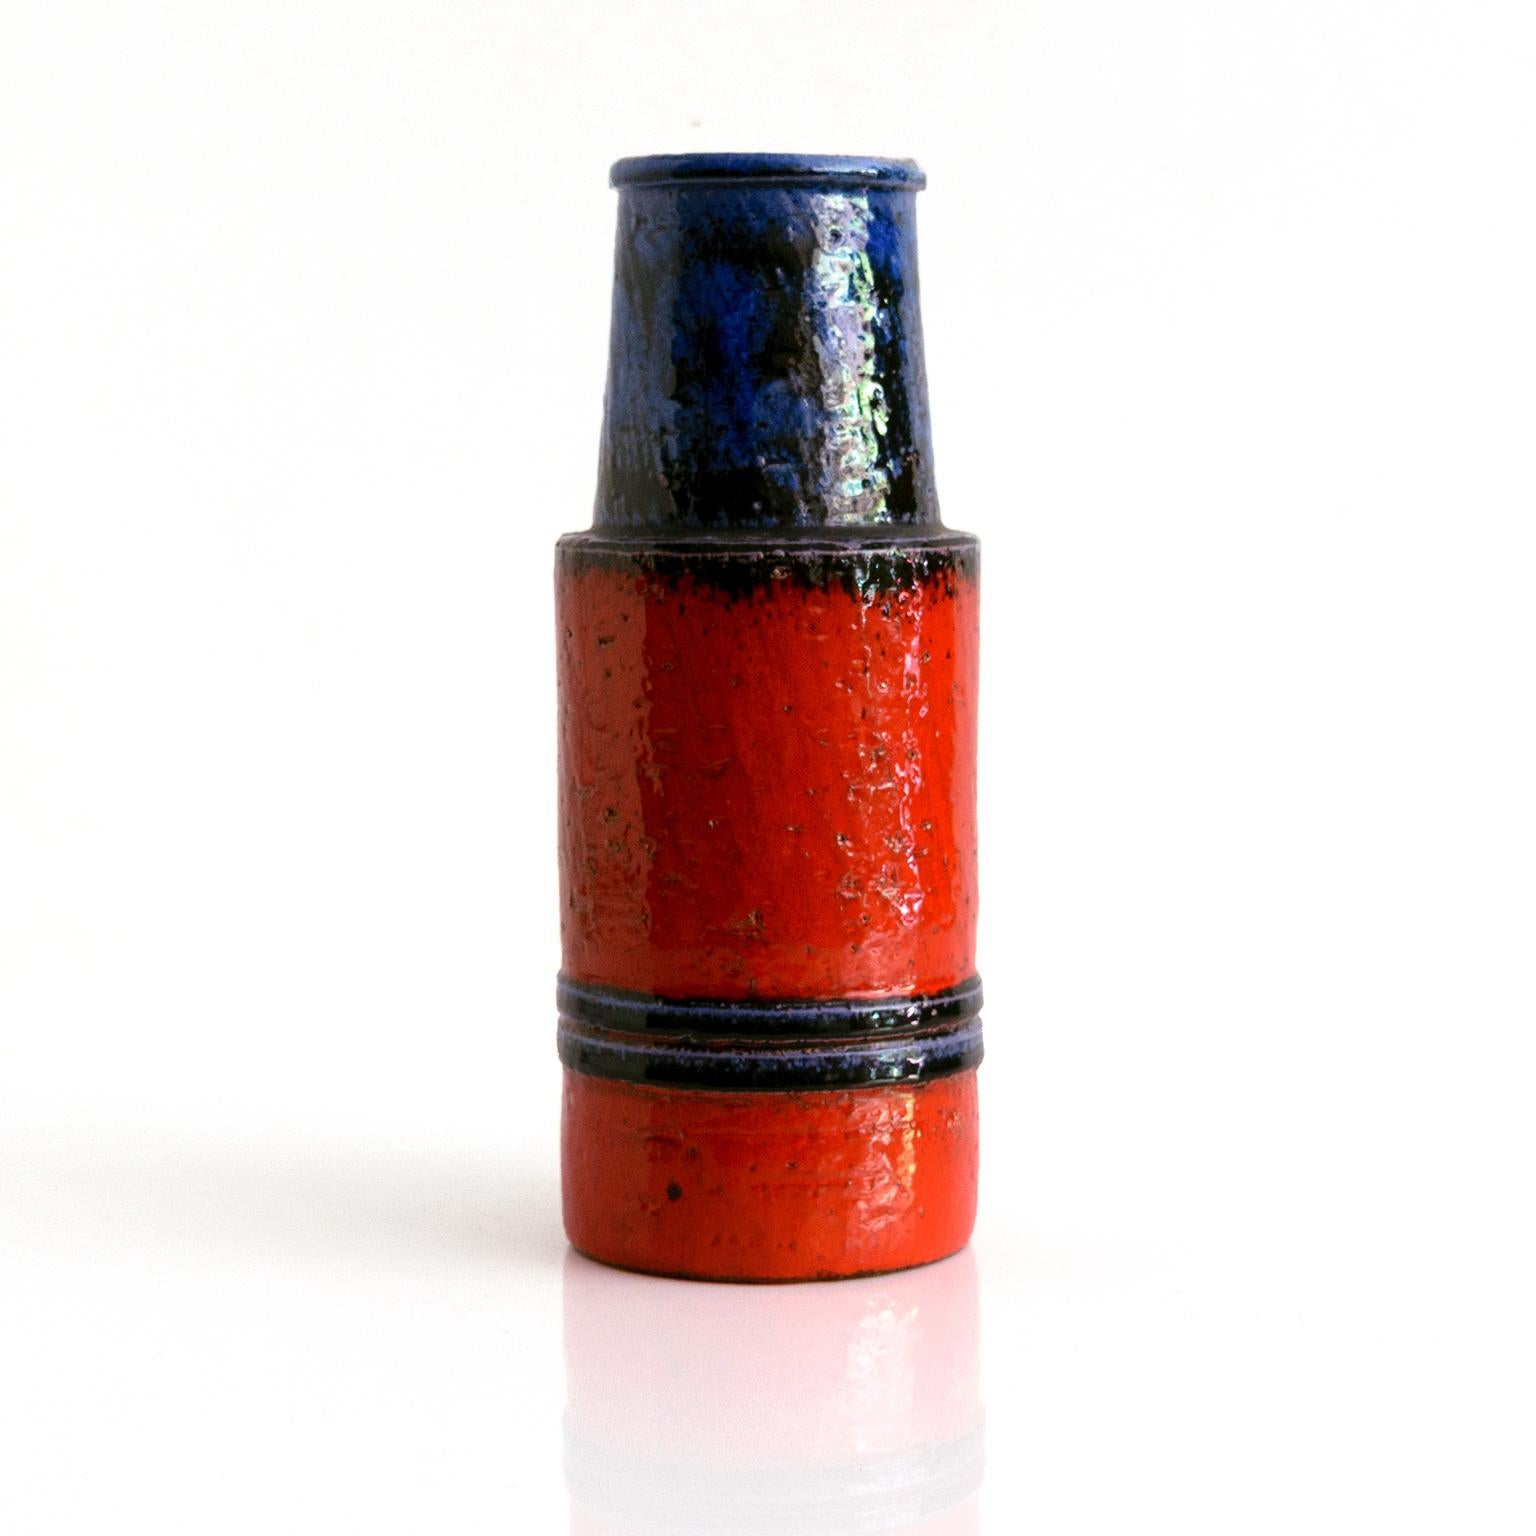 A stepped Scandinavian Modern Ernst Faxe ceramic vase in red and blue glazes. Made in Denmark circa 1960’s. 

Measures: Height: 9”. diameter: 3”.